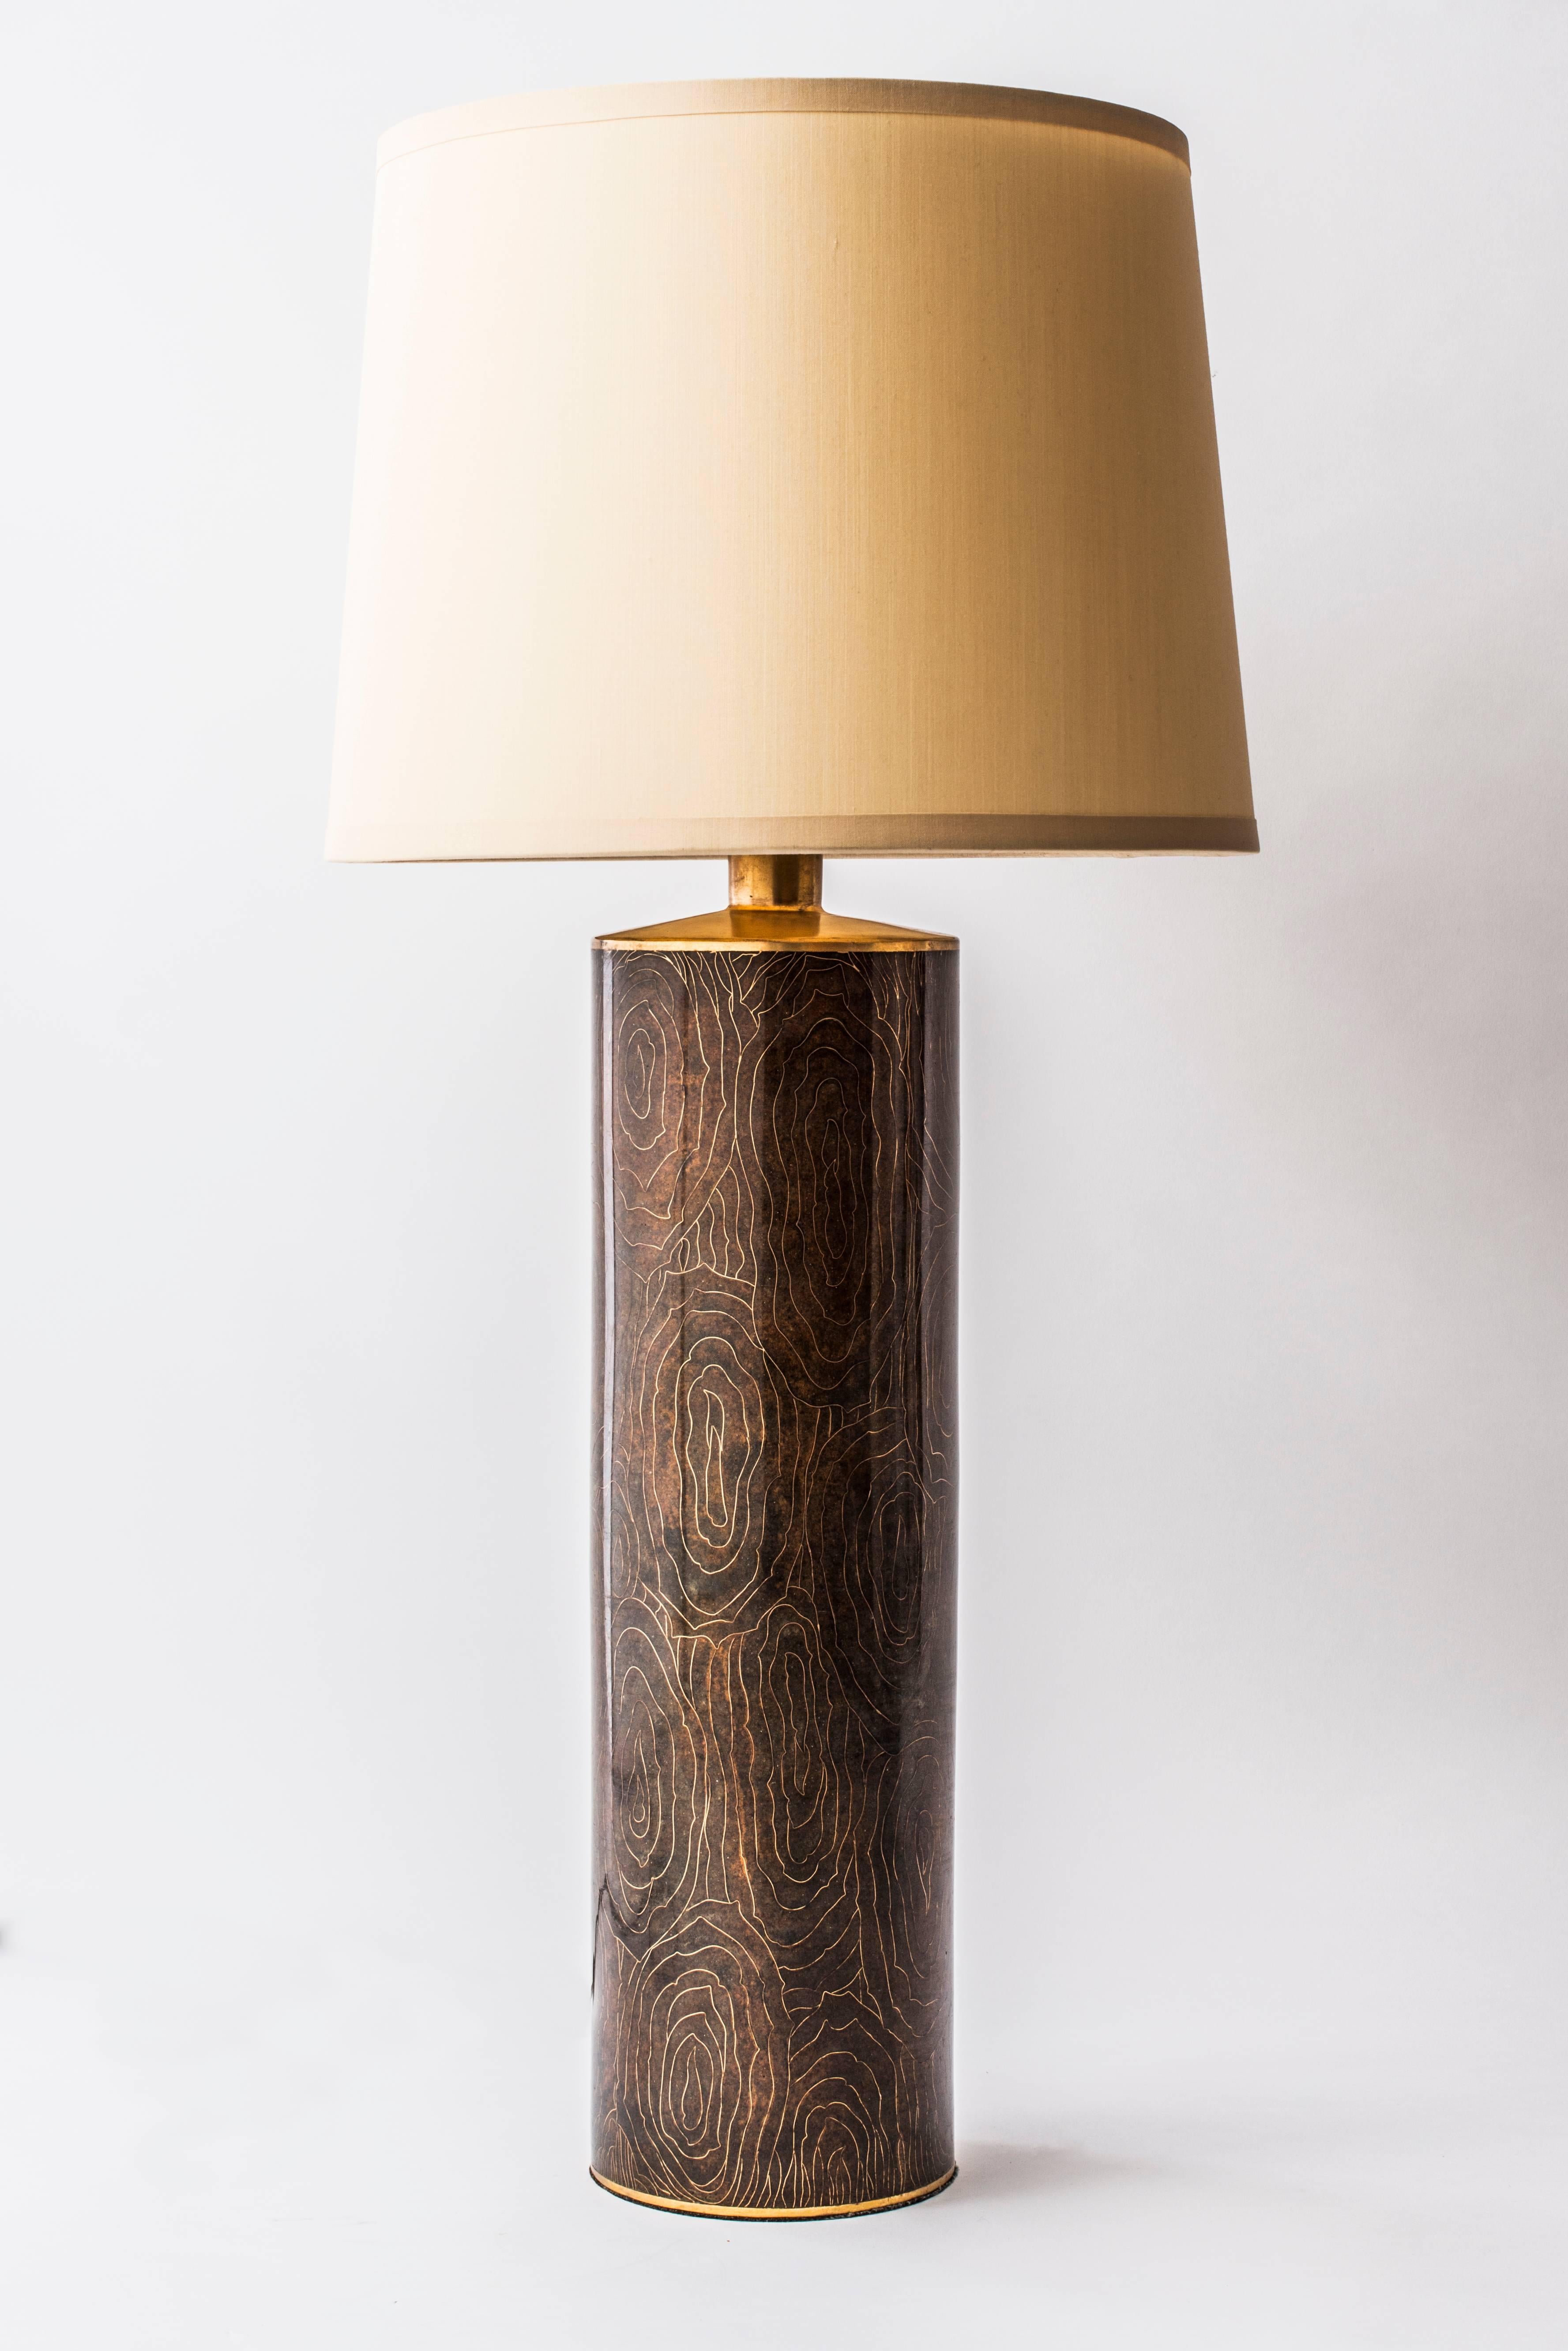 This stunning cylindrical table lamp features a faux wood grain design, created by cloisonne comprised of 24-karat gold-plated coils and trim, filled with a warm, natural, amber toned enamel. Created by Robert Kuo for McGuire.